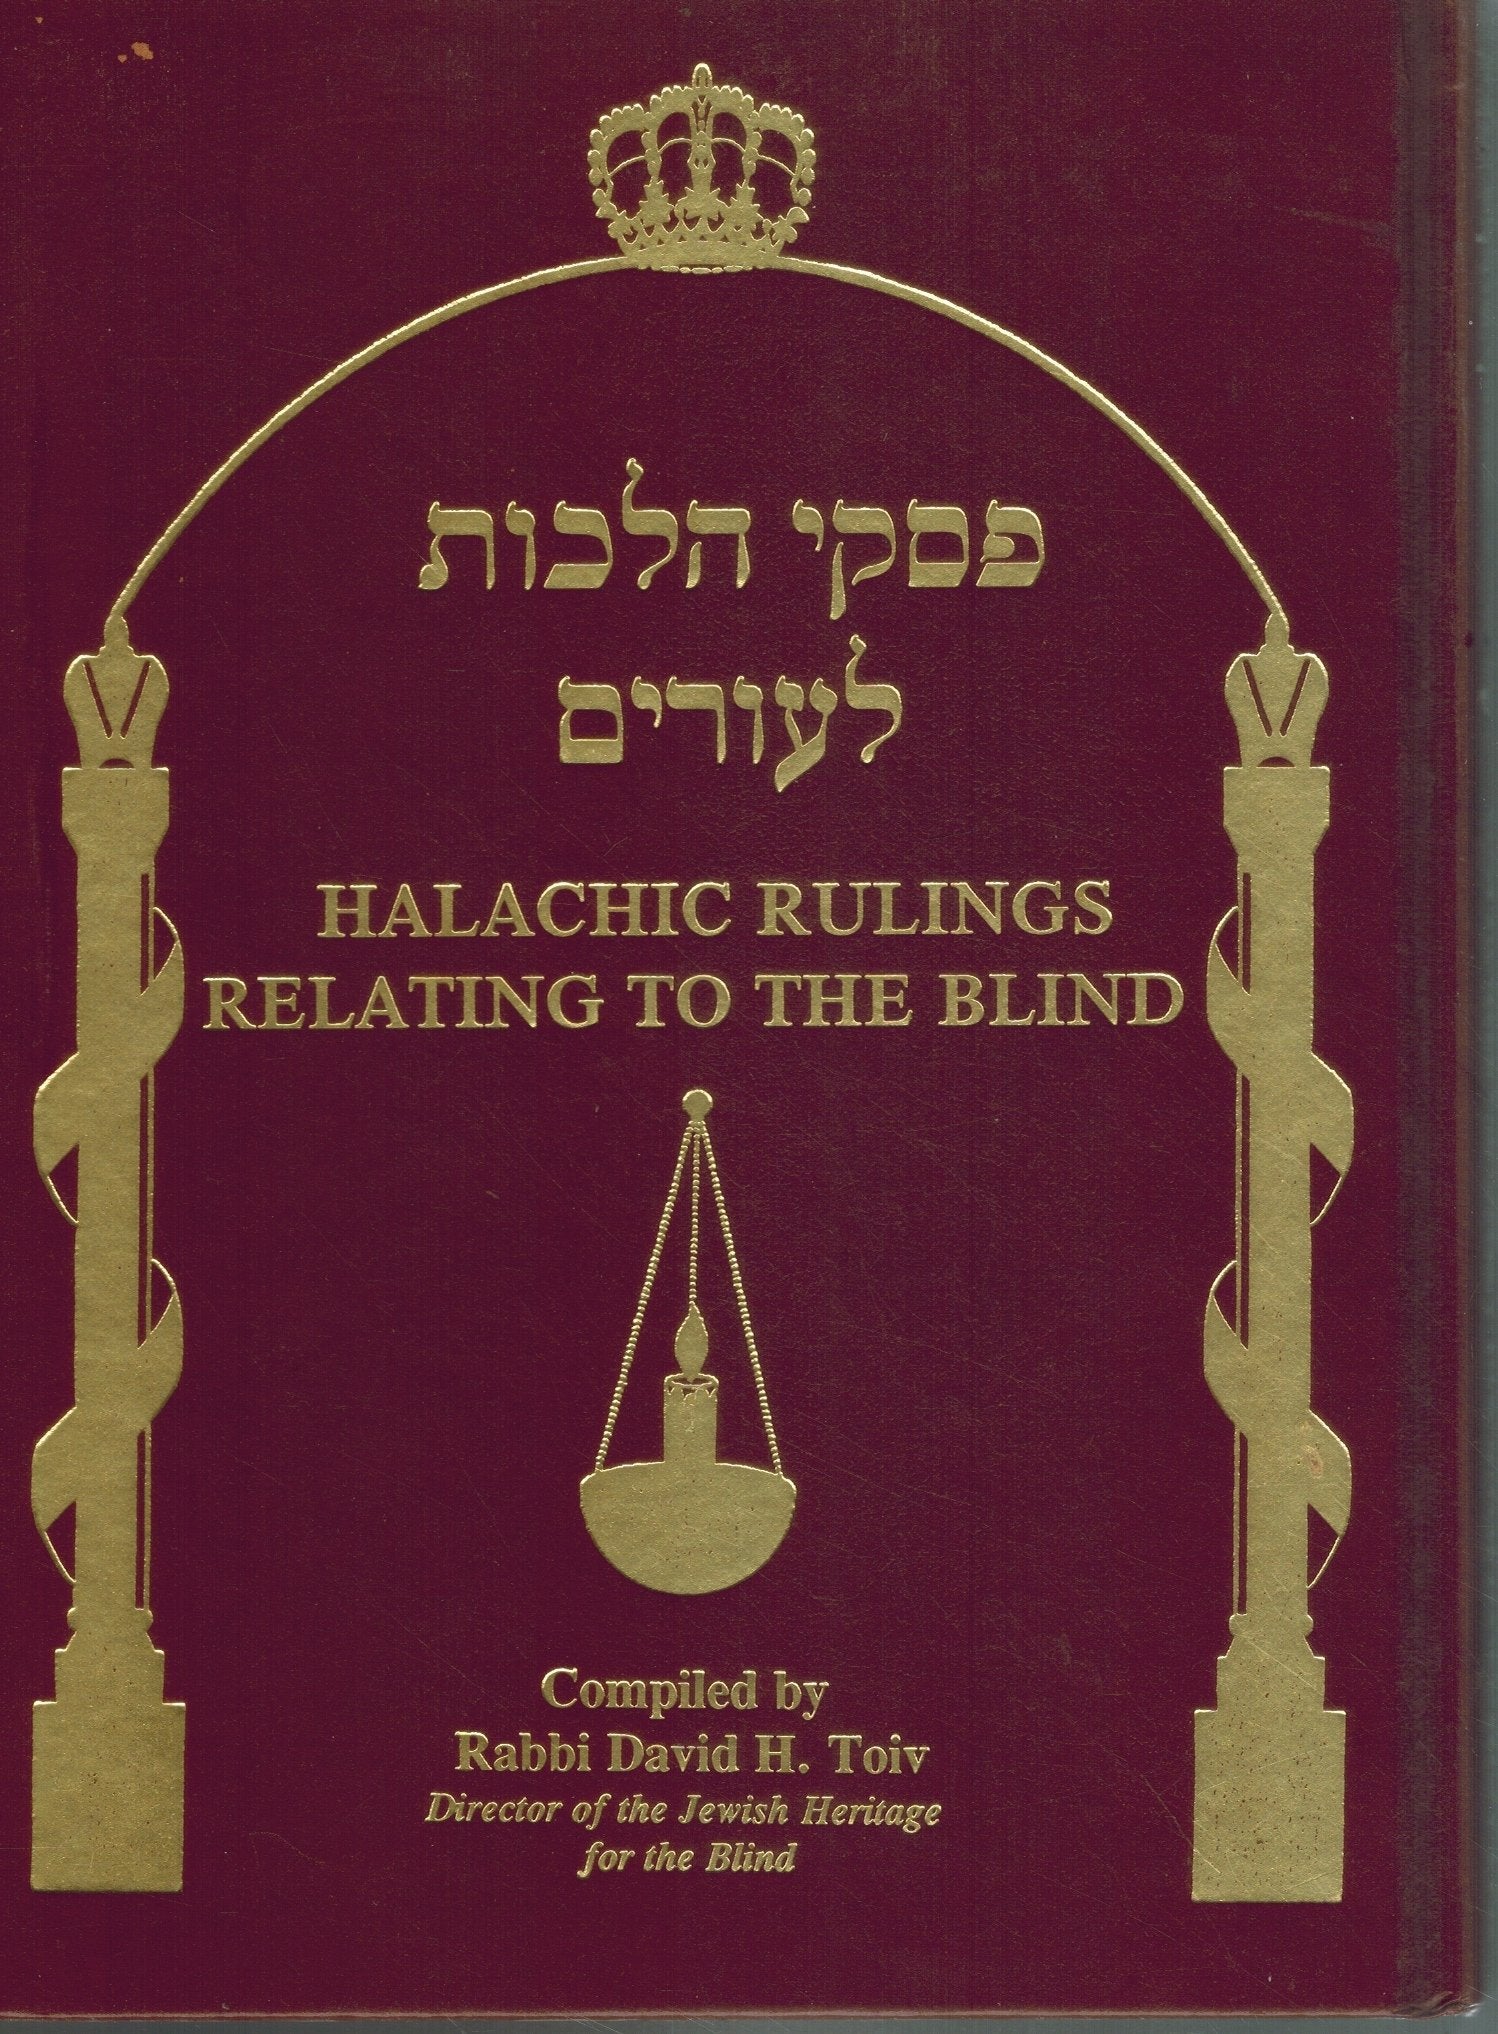 HALACHIC RULINGS RELATING TO THE BLIND  by Rabbi David H. Toiv